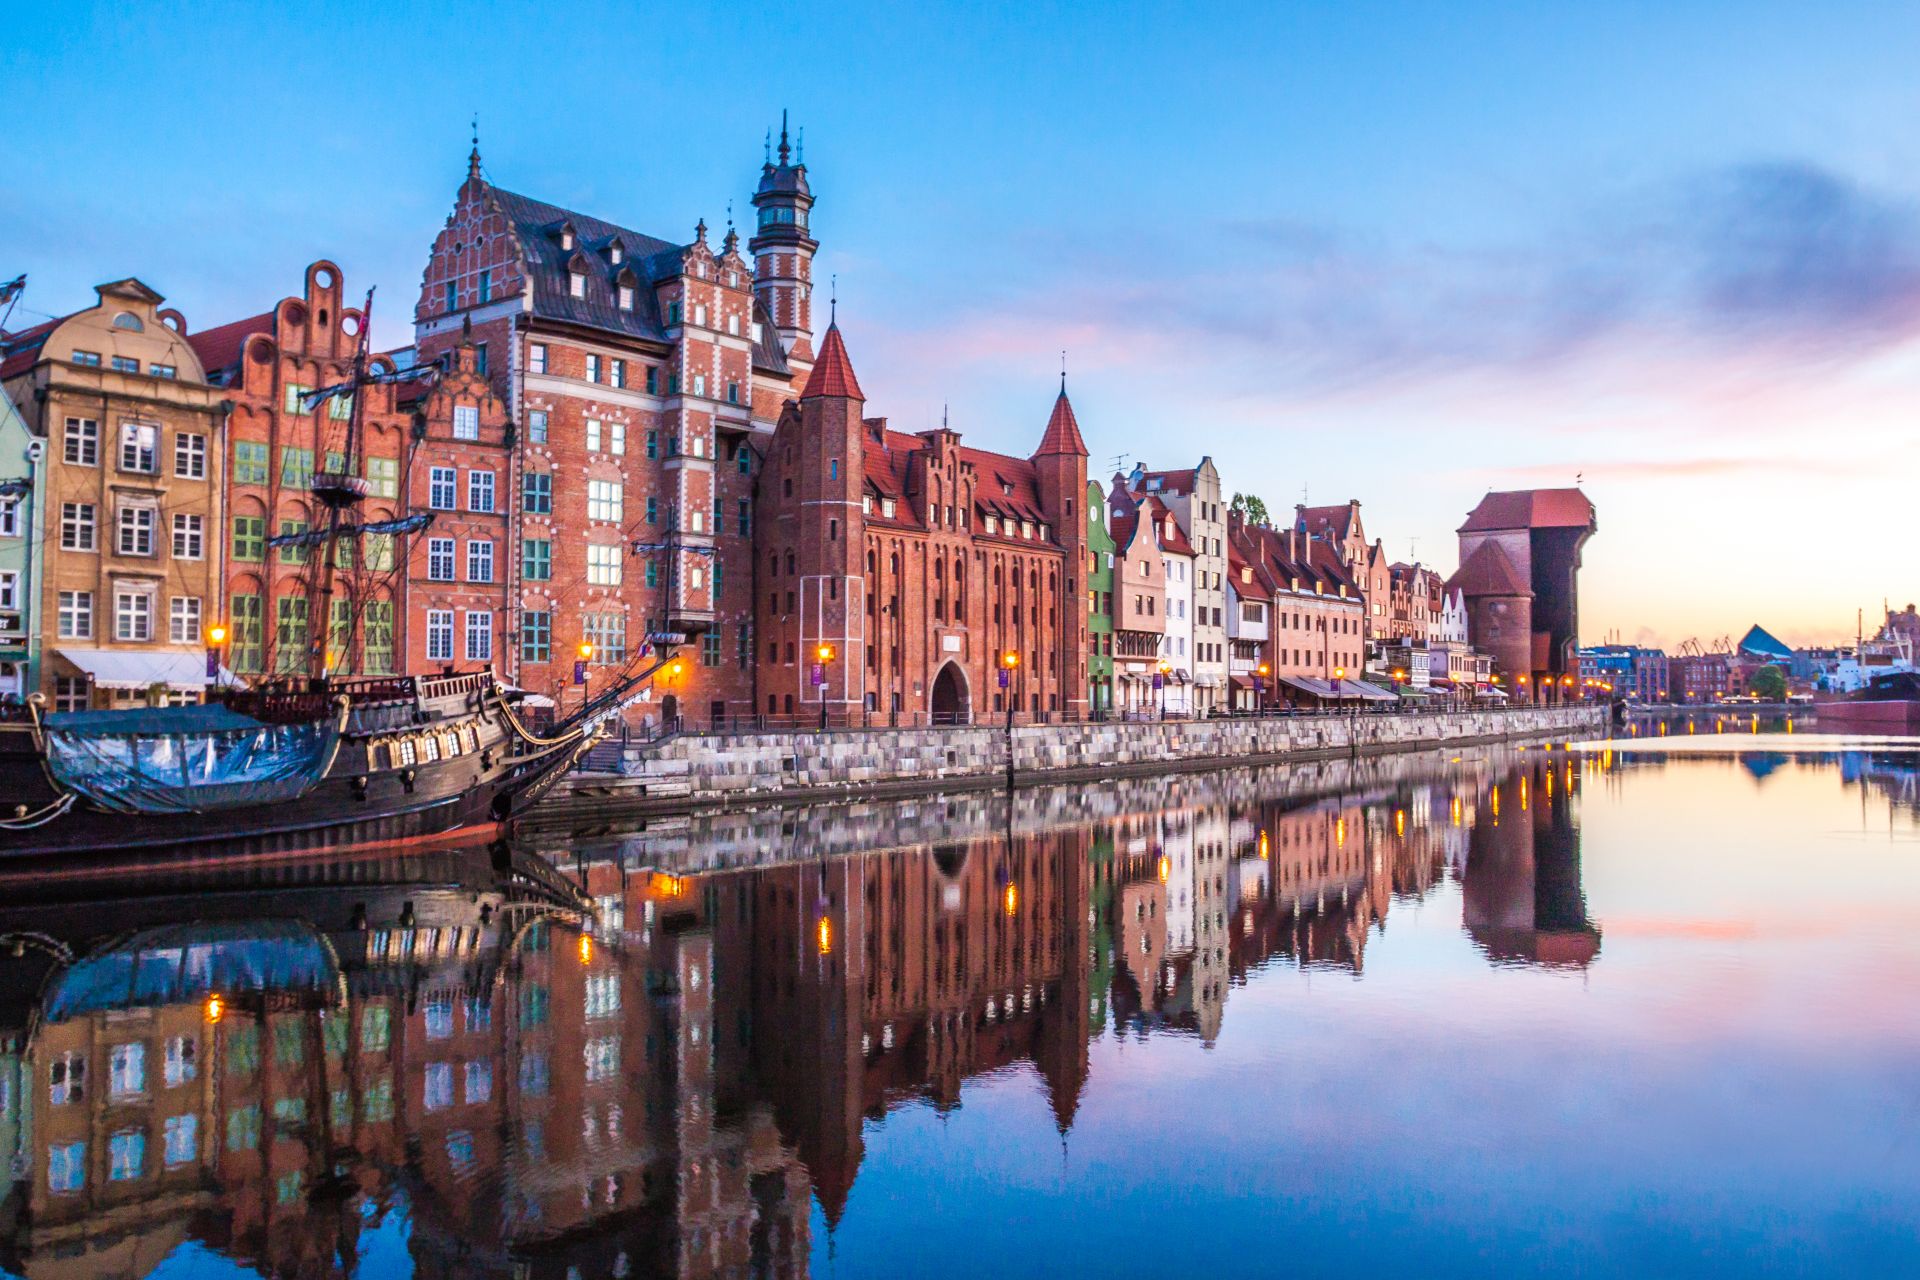 The old town of Gdansk and the famous crane